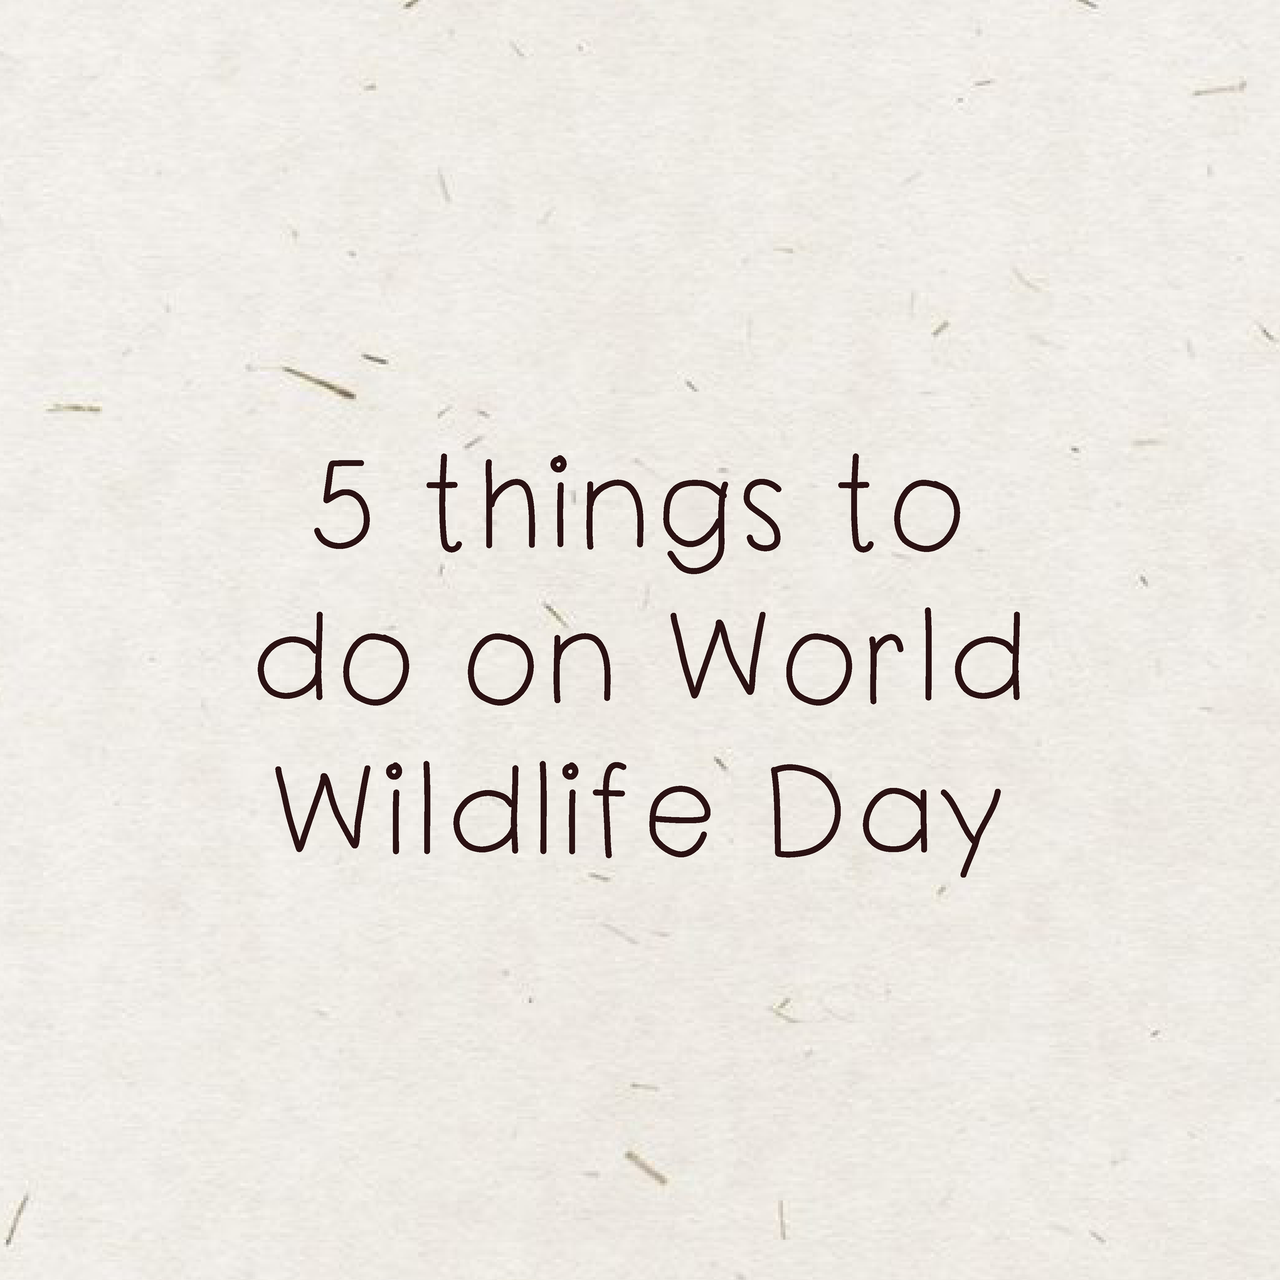 5 things to do on World Wildlife Day